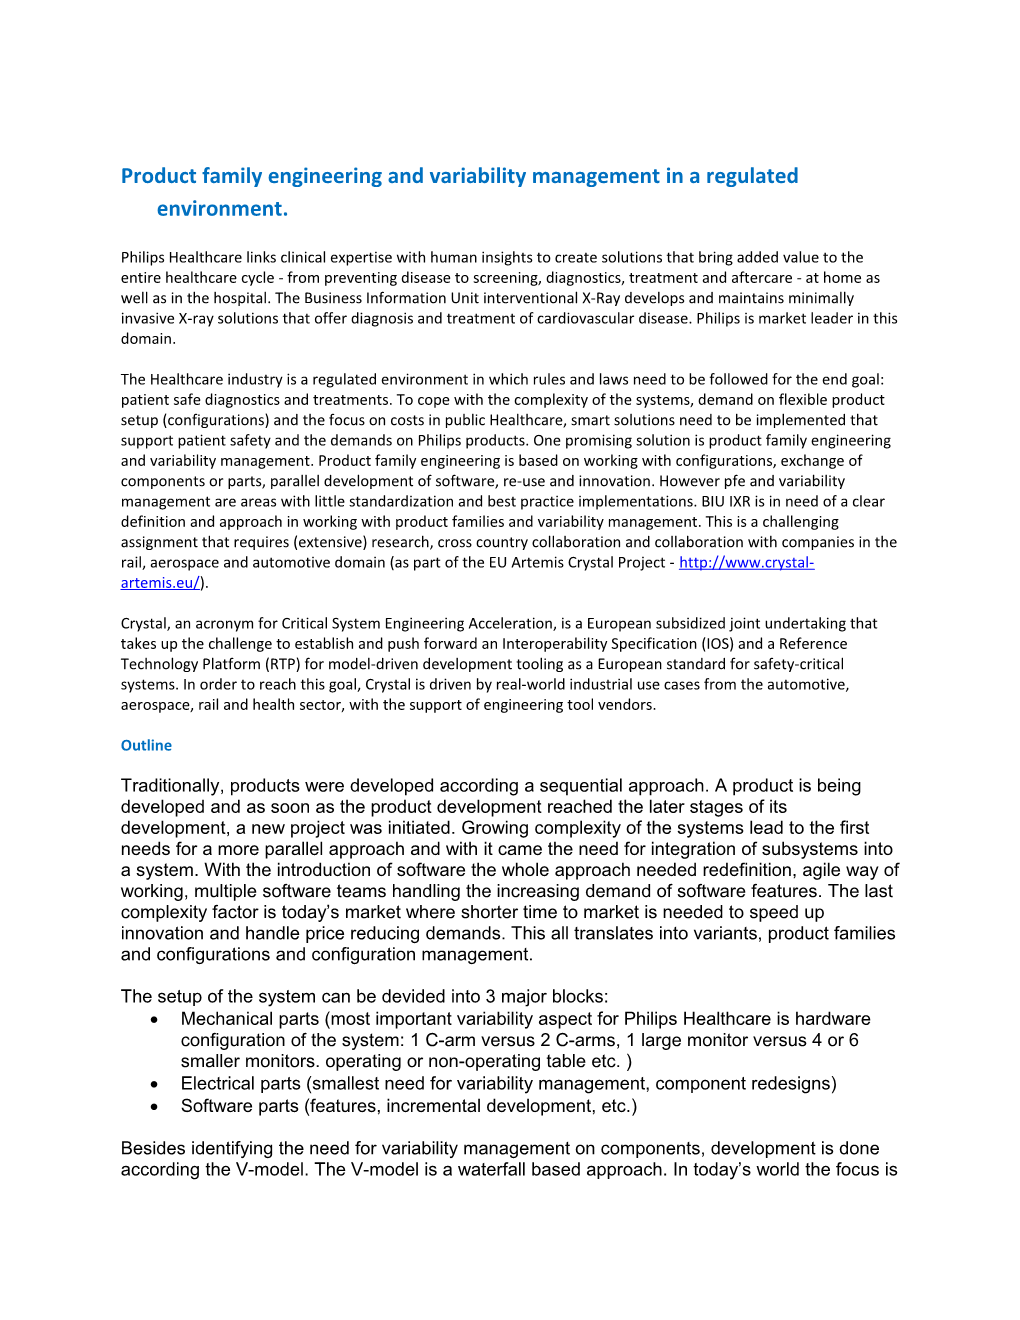 Product Family Engineering Andvariability Management in a Regulated Environment